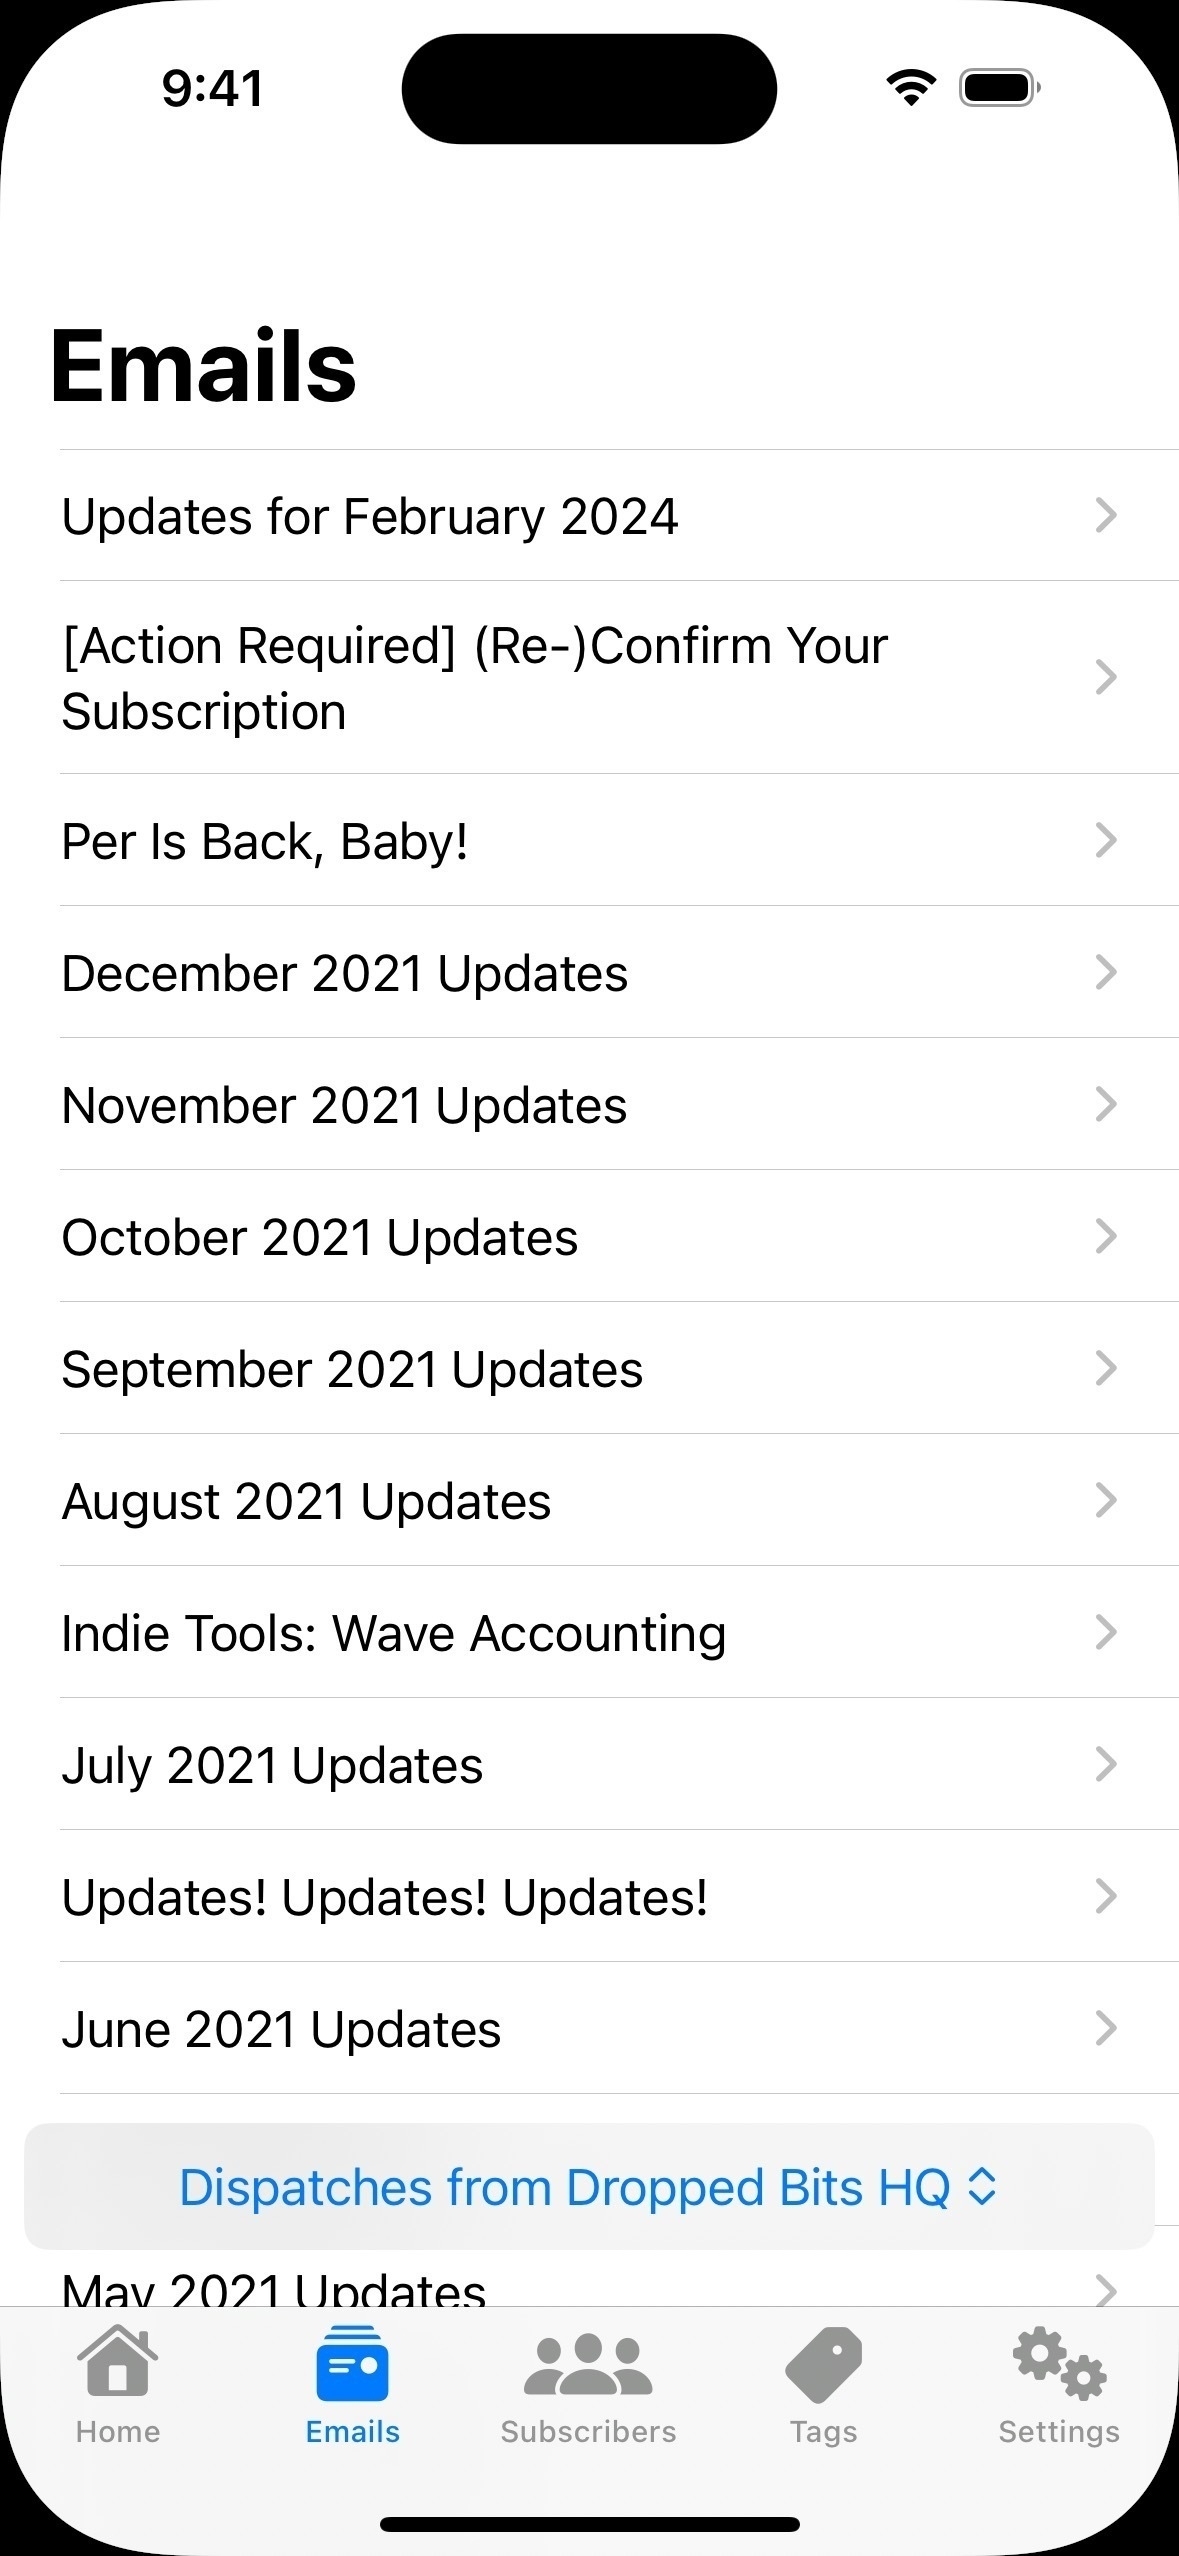 An iPhone screenshot of a new app showing a list of email subjects. In the tab bar there are also options for "Home", "Subscribers", "Tags", and "Settings" that can be selected.